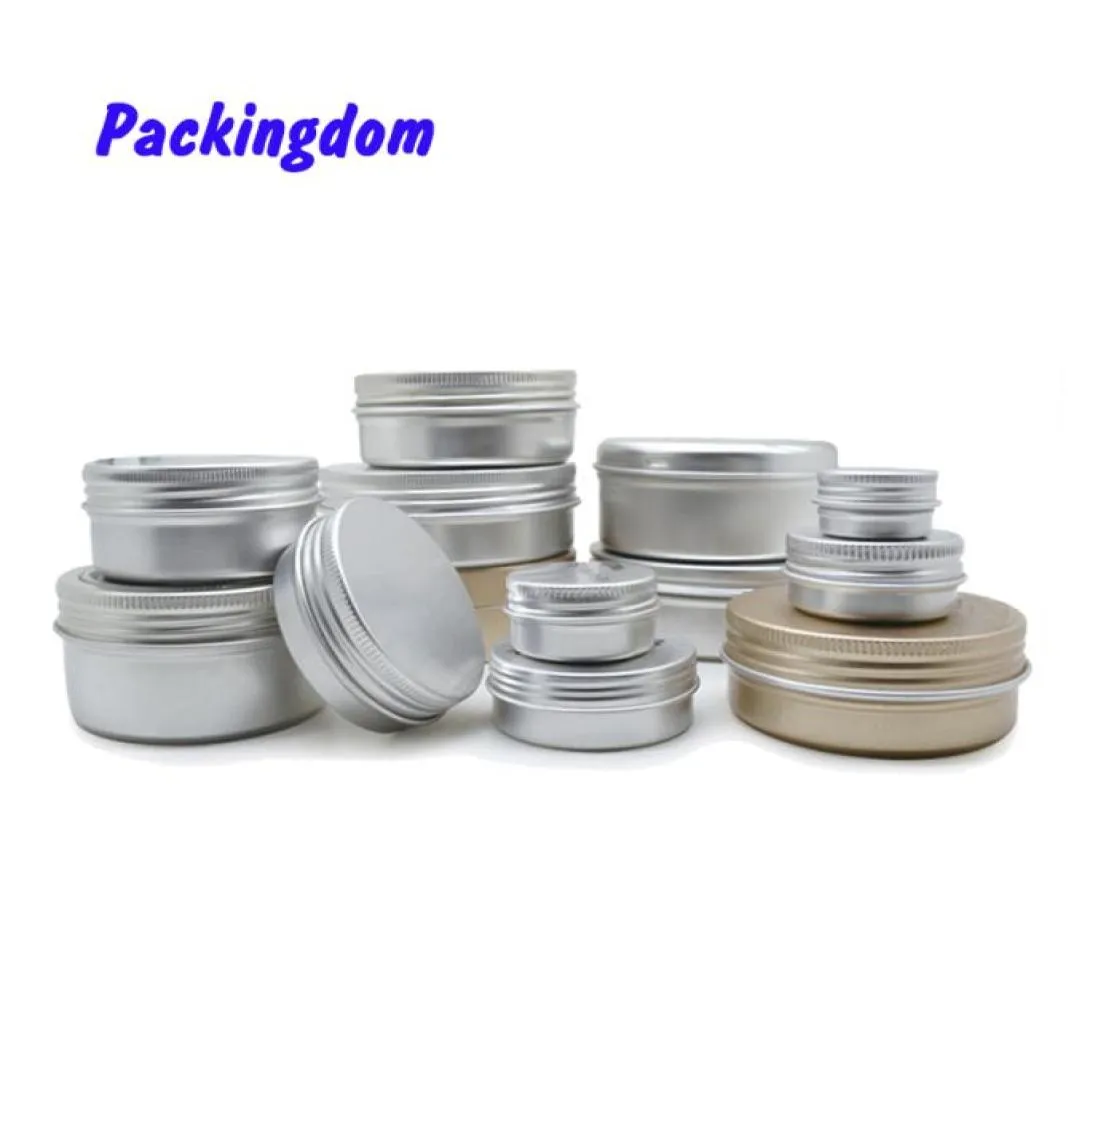 50pcs 5g 10g 15g 20g 30g 50g 80g 100g 200g Aluminum Tin Jar Lip Balm Container Empty Candle Jars Metal Containers Cream Pot Box CX3413870